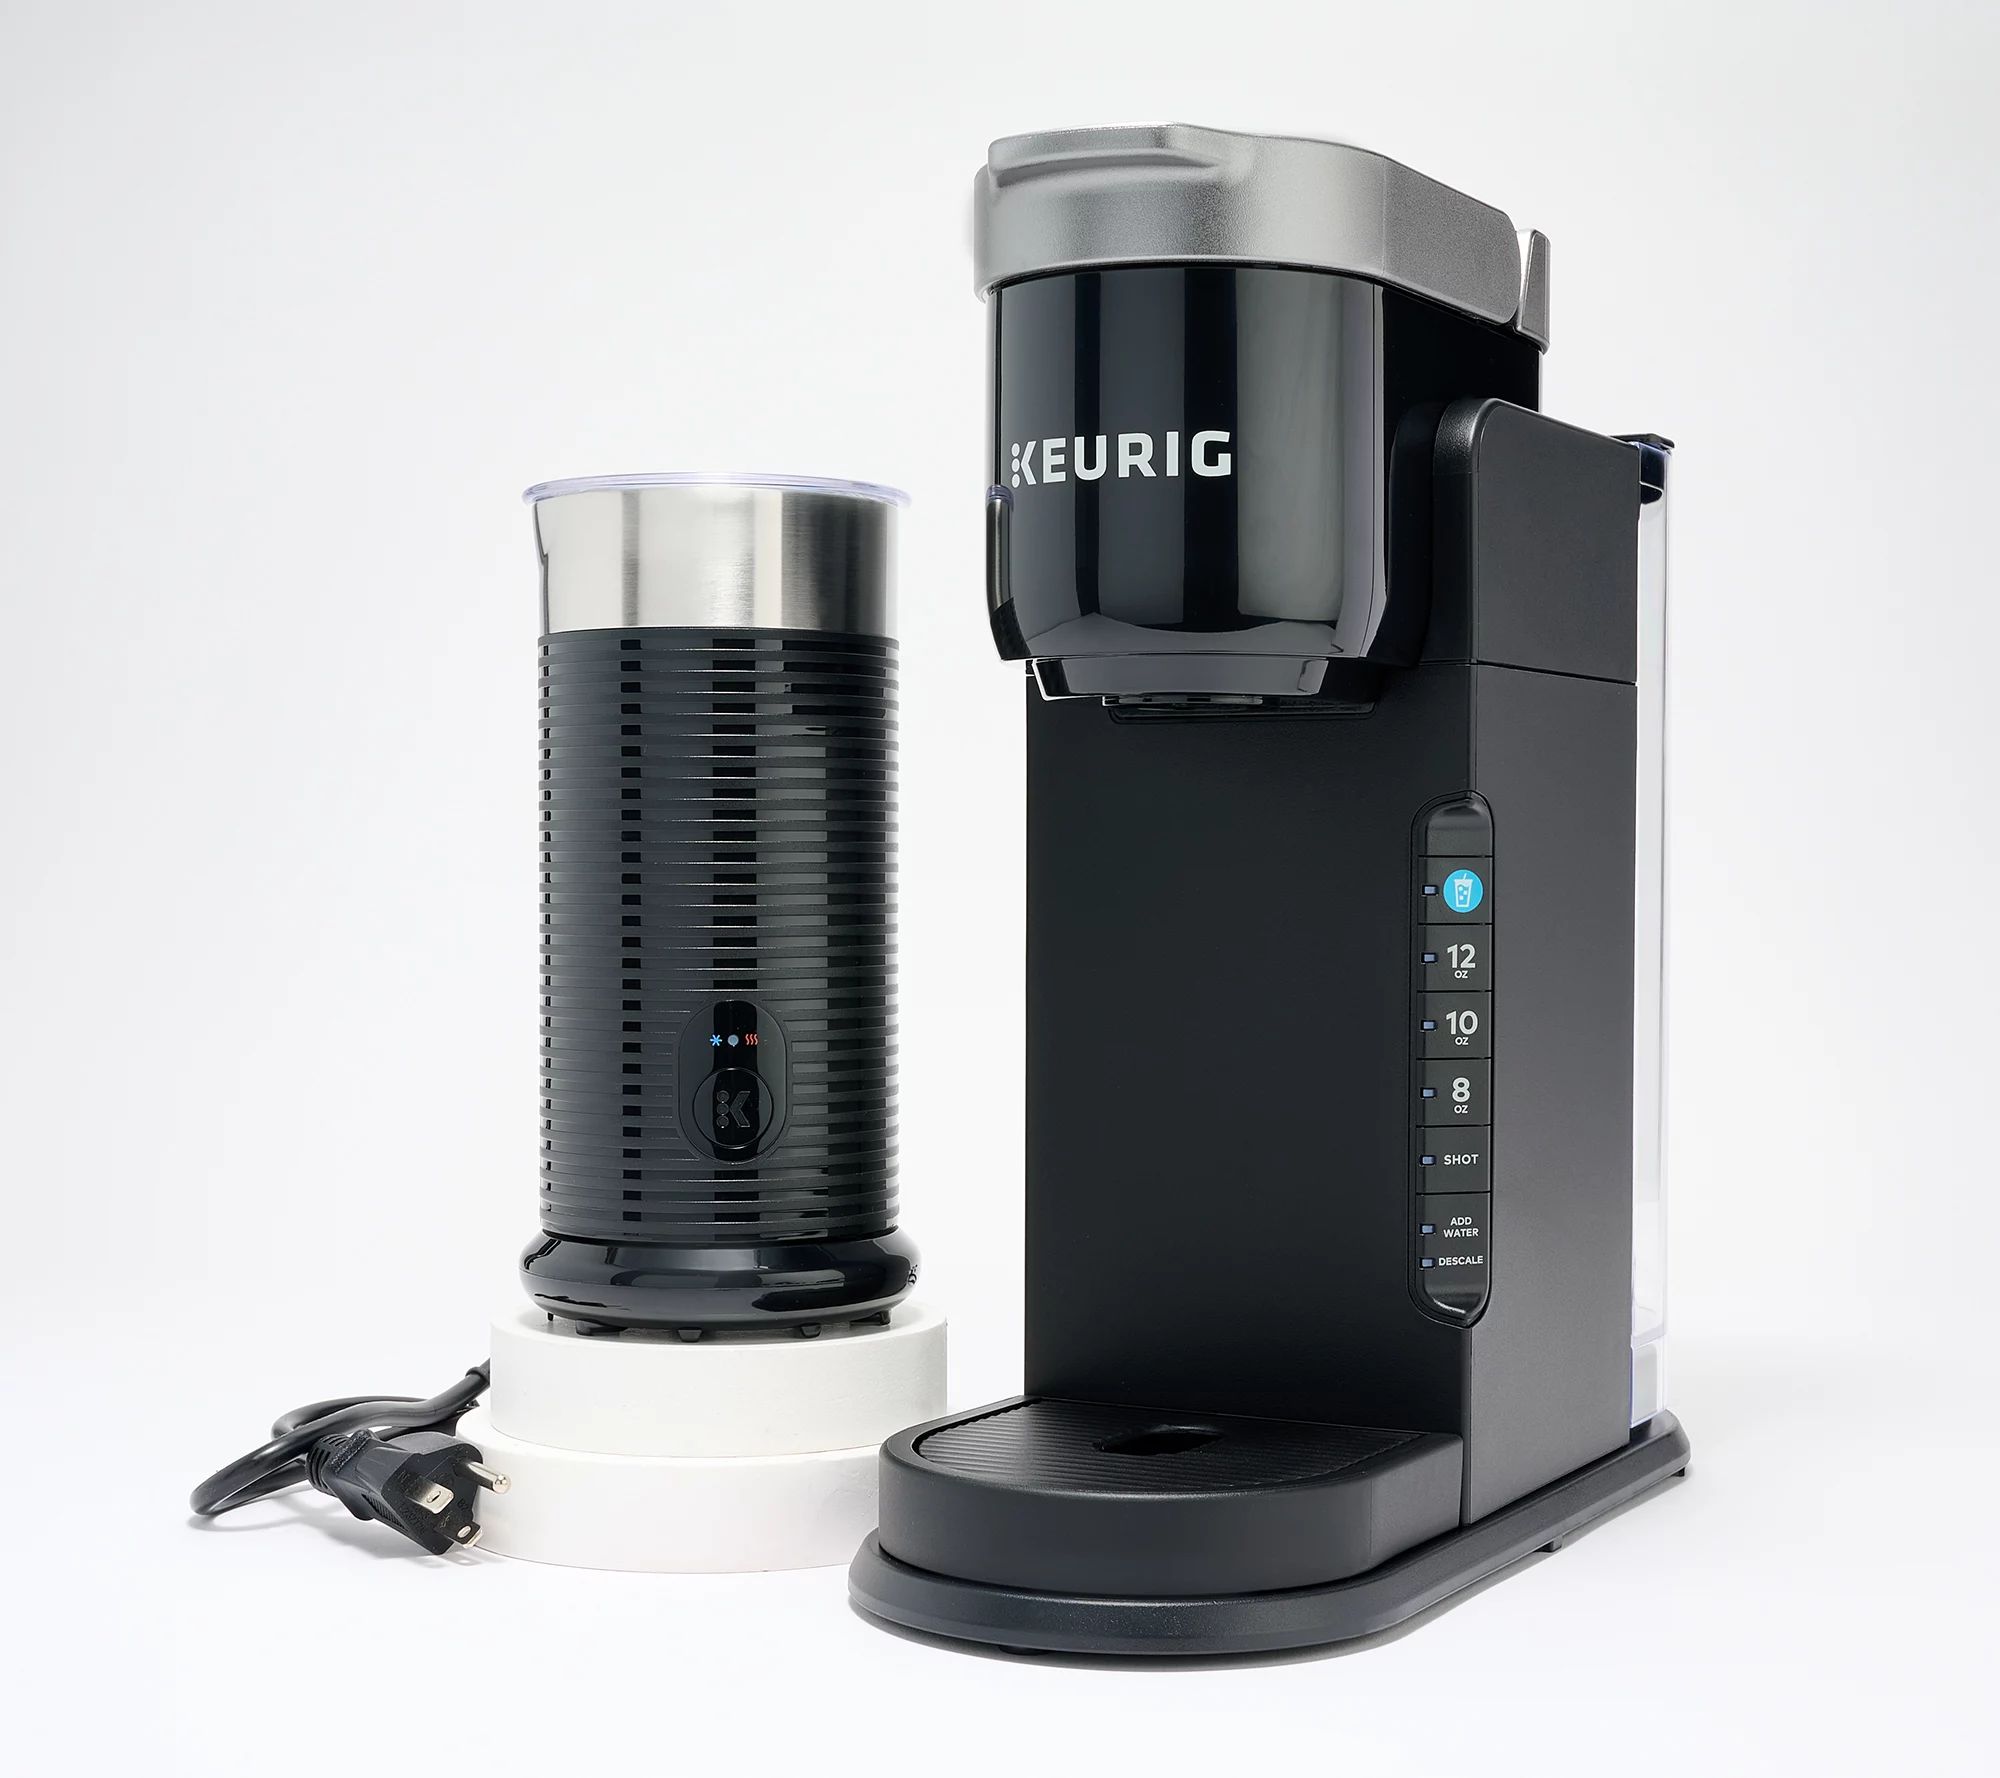 Keurig K-Cafe Barista Bar Coffee Maker w/ Frother and Voucher - QVC.com | QVC